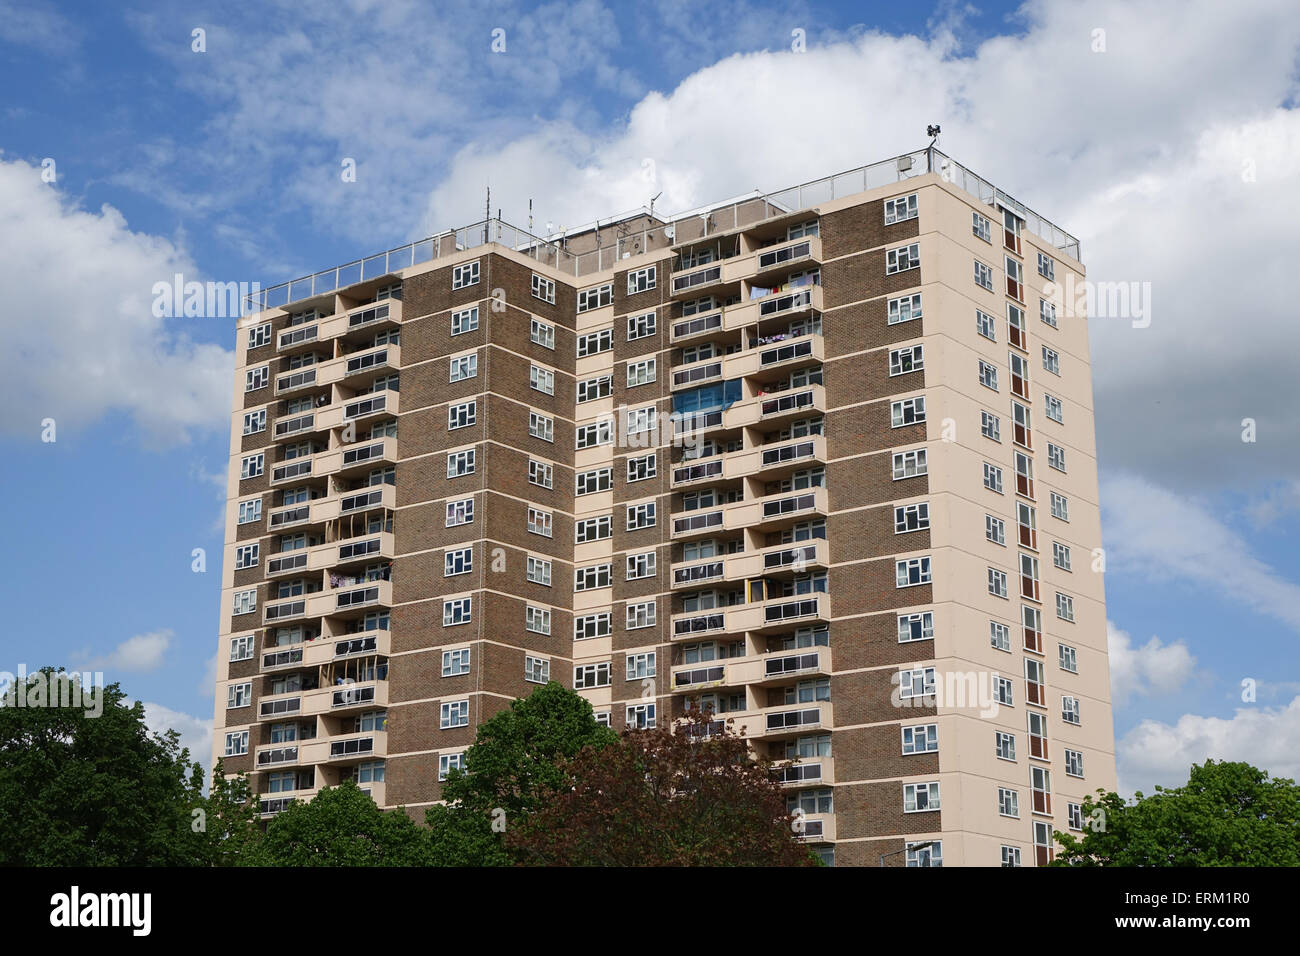 Shuttleworth High Rise Flats, beside River Witham, Lincoln Stock Photo